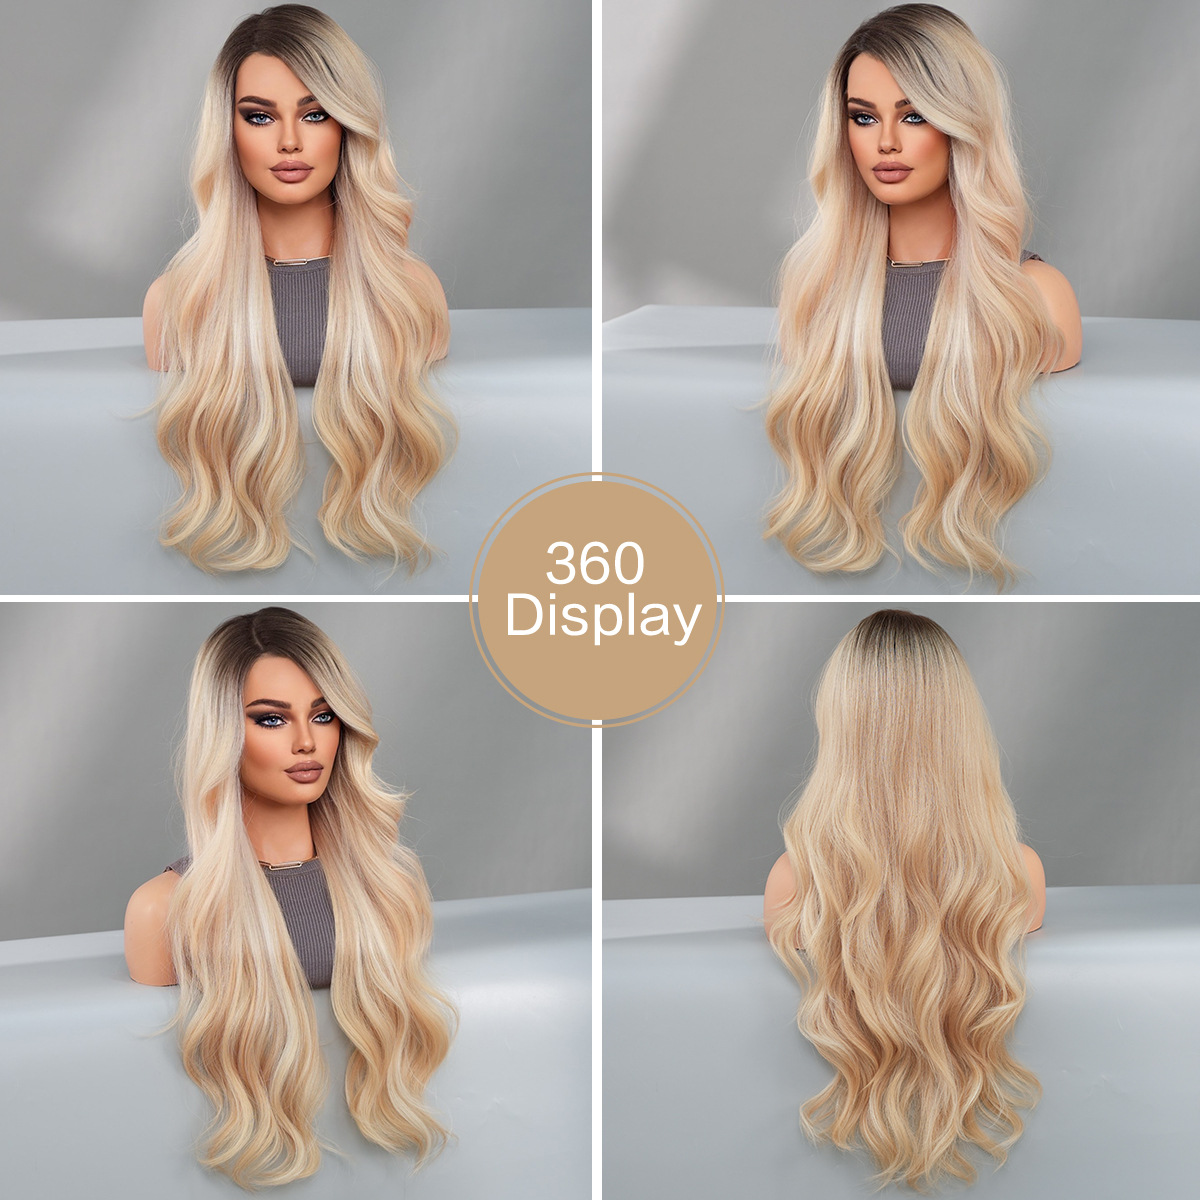 A stunning gold T-part lace wig designed for women, featuring synthetic wavy hair and a side part for a natural look